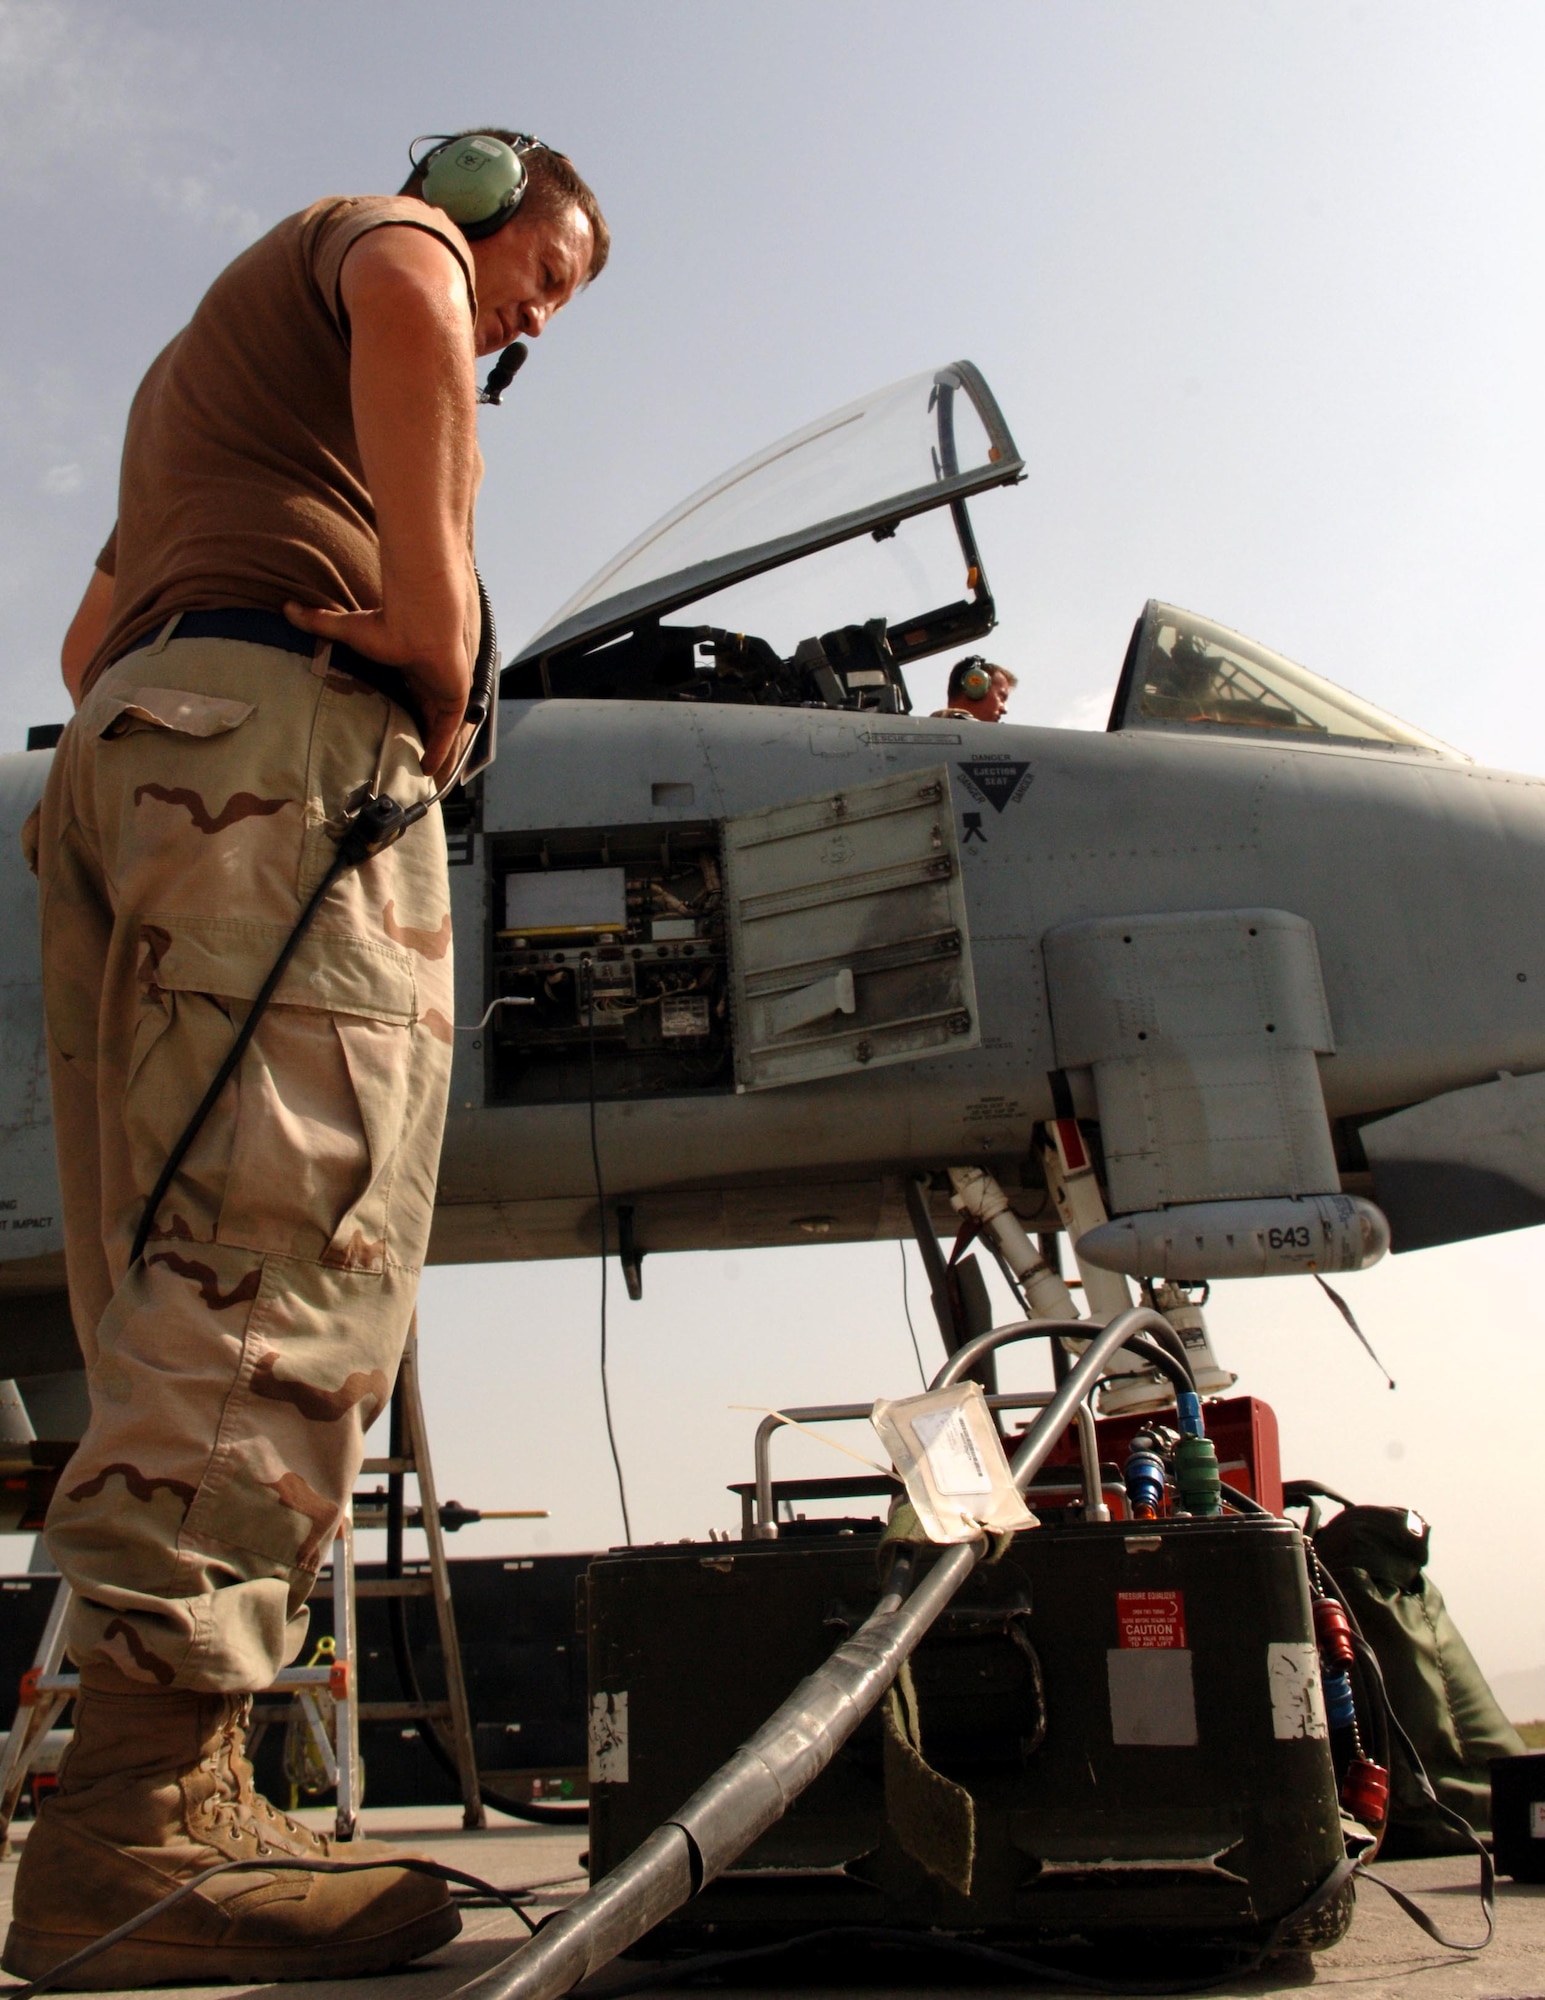 Tech. Sgt. Carl Clark, left, and Master Sgt. Dan Abrams, in the cockpit, do an altimeter check  on an A-10 Thunderbolt II on Aug. 17 on Bagram Airfield's flightline.  Both sergeants are in the Air Force Reserve's 442nd Fighter Wing, Whiteman Air Force Base, Mo. A-10s at Bagram have supported two offensives this summer, Mountain Thrust and Mountain Lion.  (U.S. Air Force photo by Master Sgt. Orville F. Desjarlais Jr.)